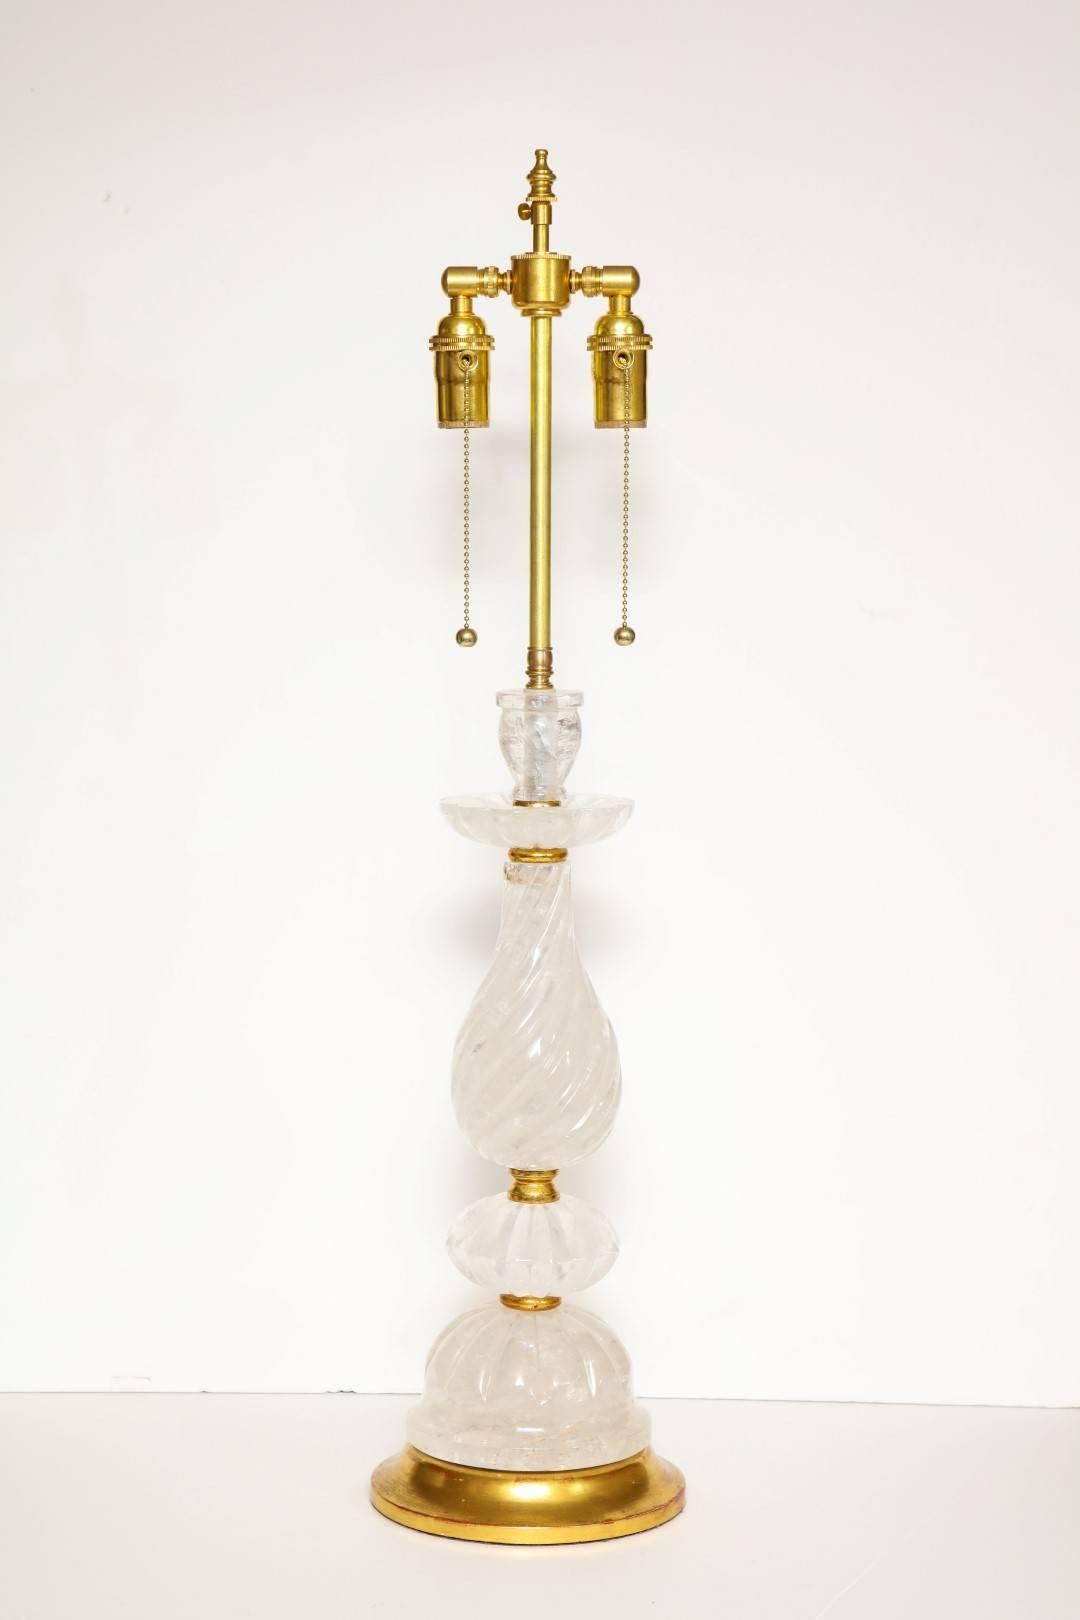 A new rock crystal table lamp, swirl glass design with giltwood elements, double cluster fitting.